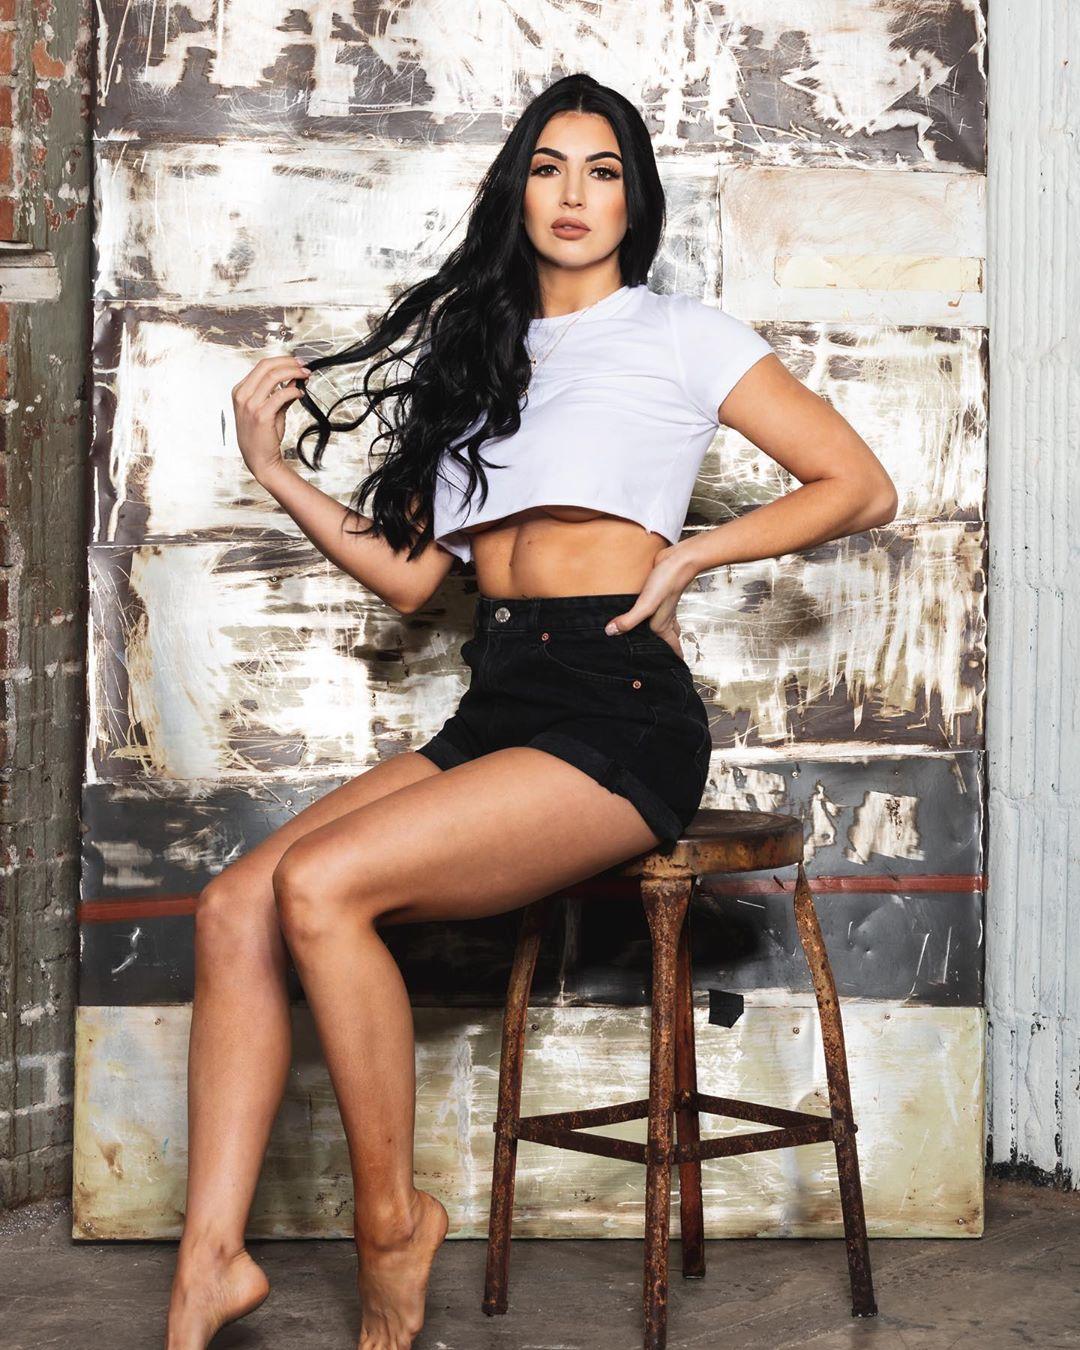 60+ Hot Pictures Of Billie Kay Will Rock The WWE Fan Inside You 180